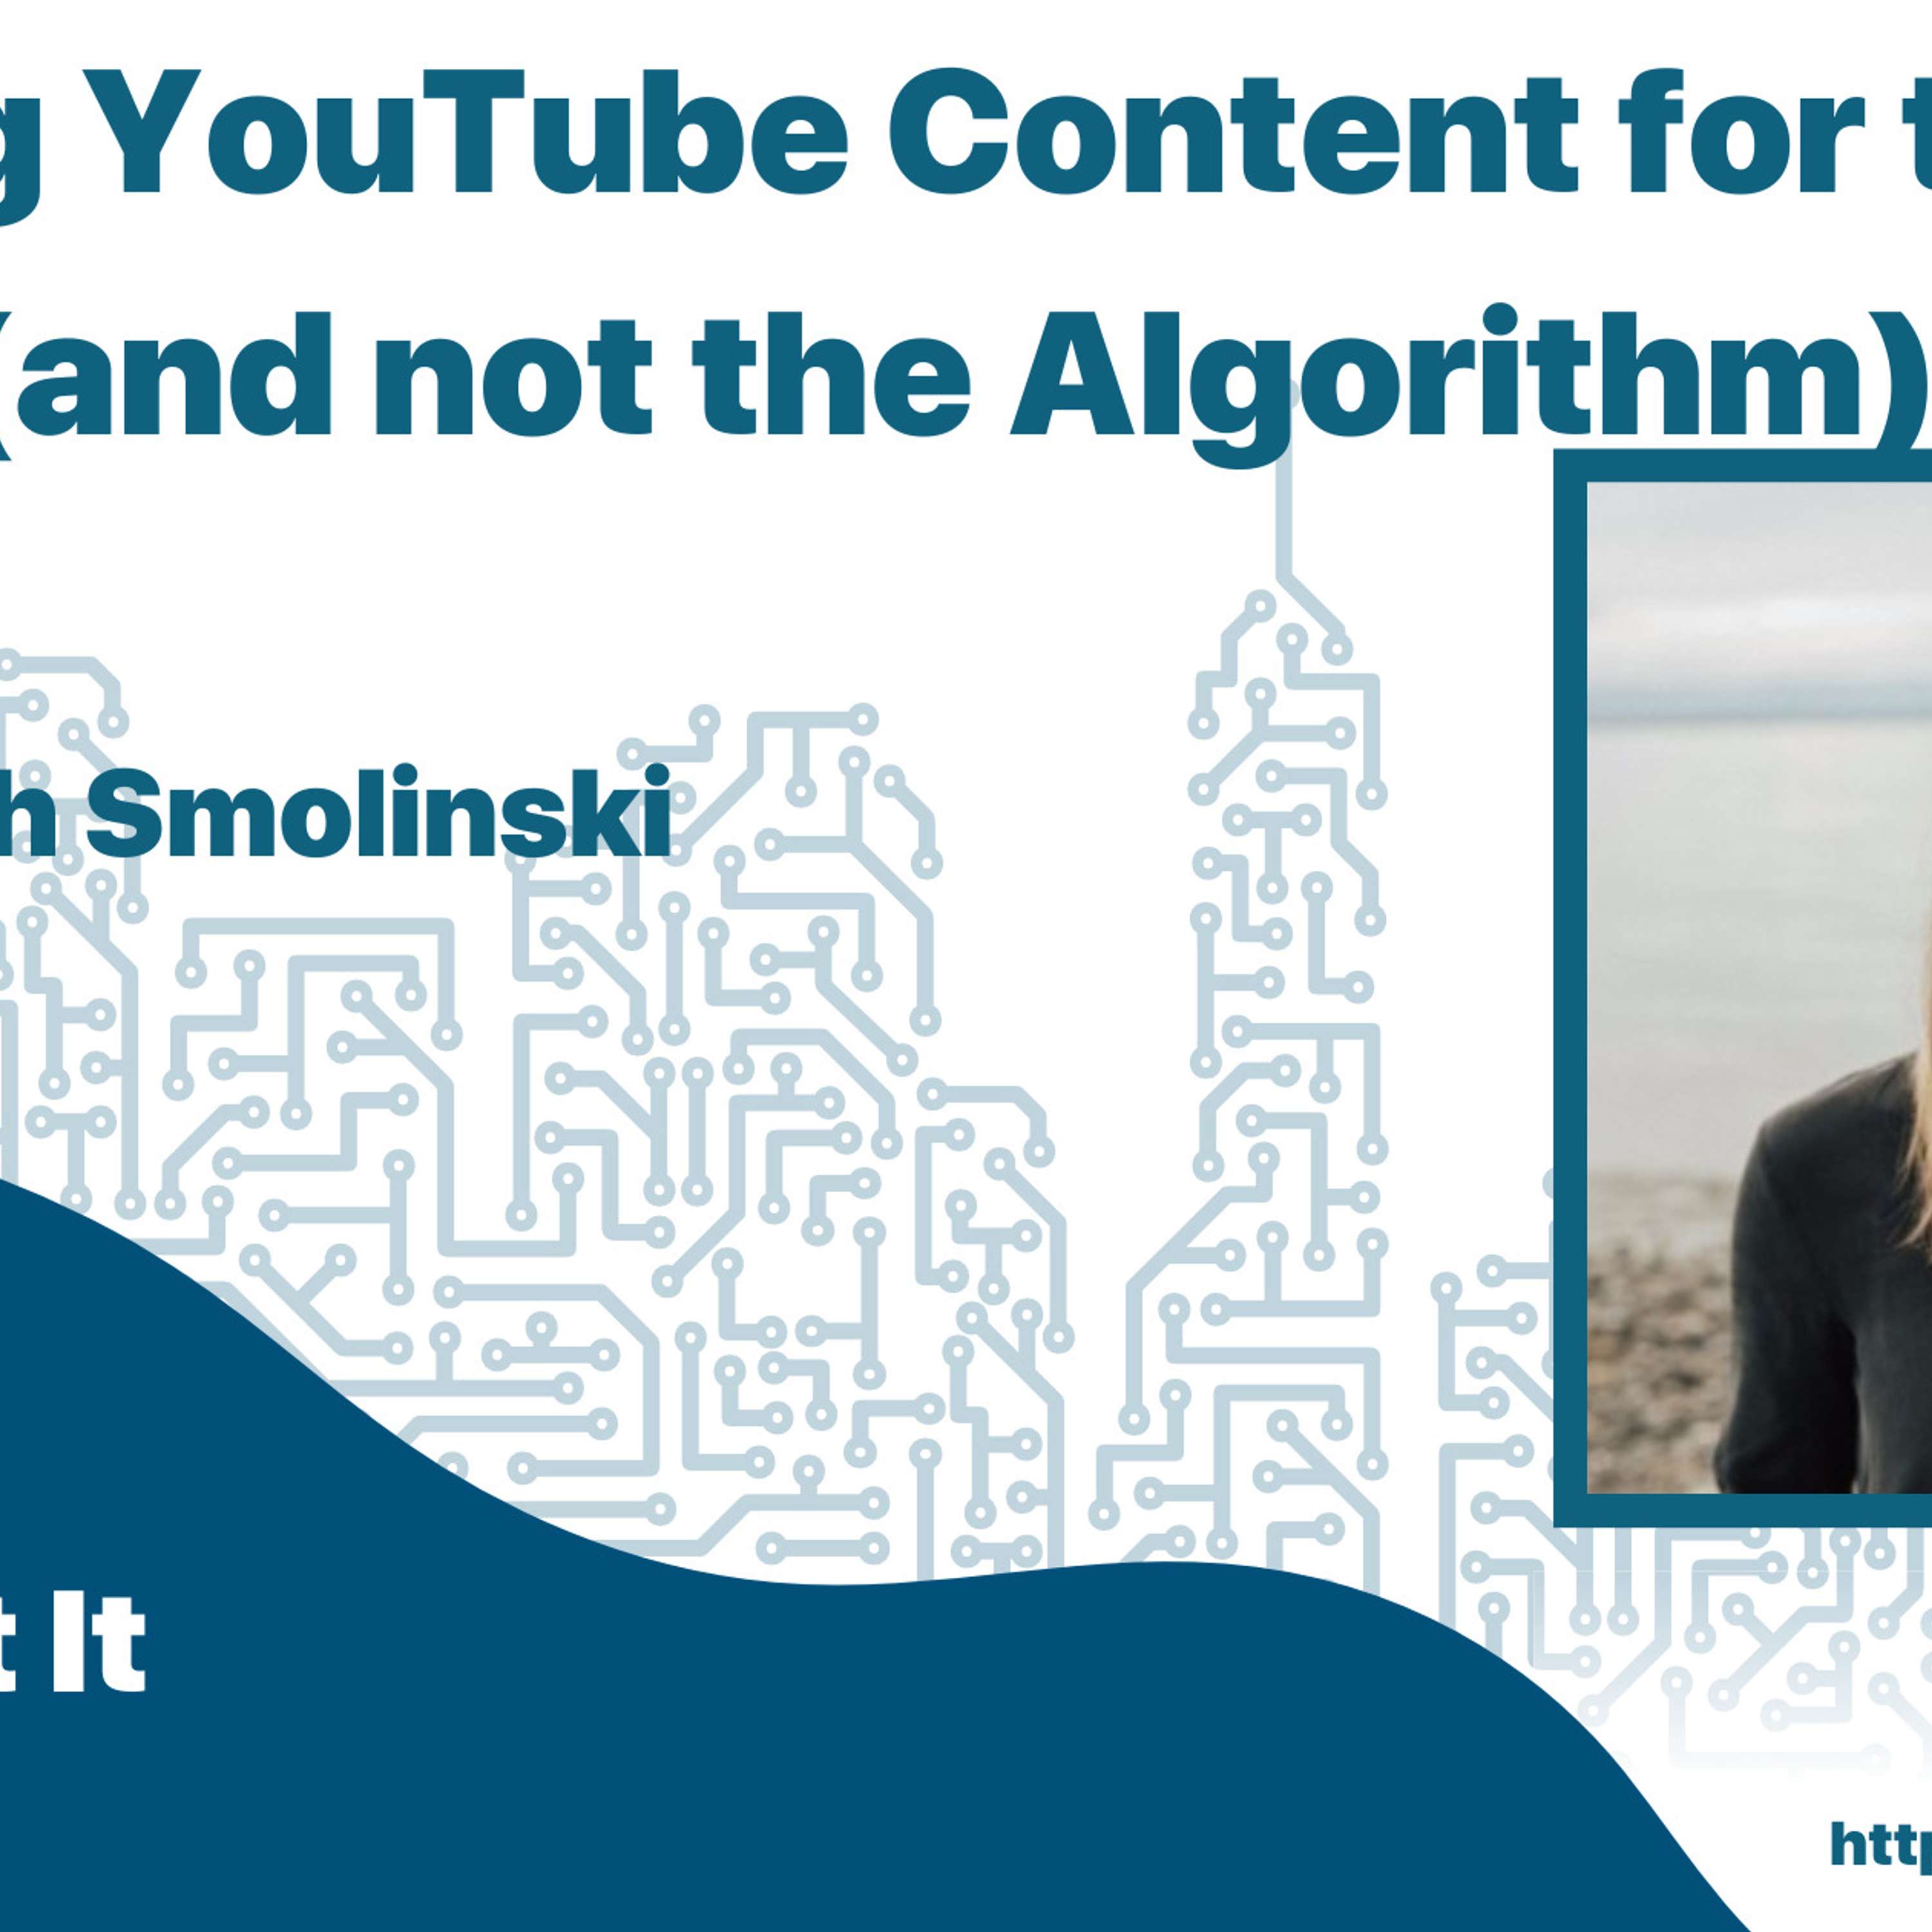 Creating YouTube Content for the Viewer (and not the Algorithm) with Hannah Smolinski